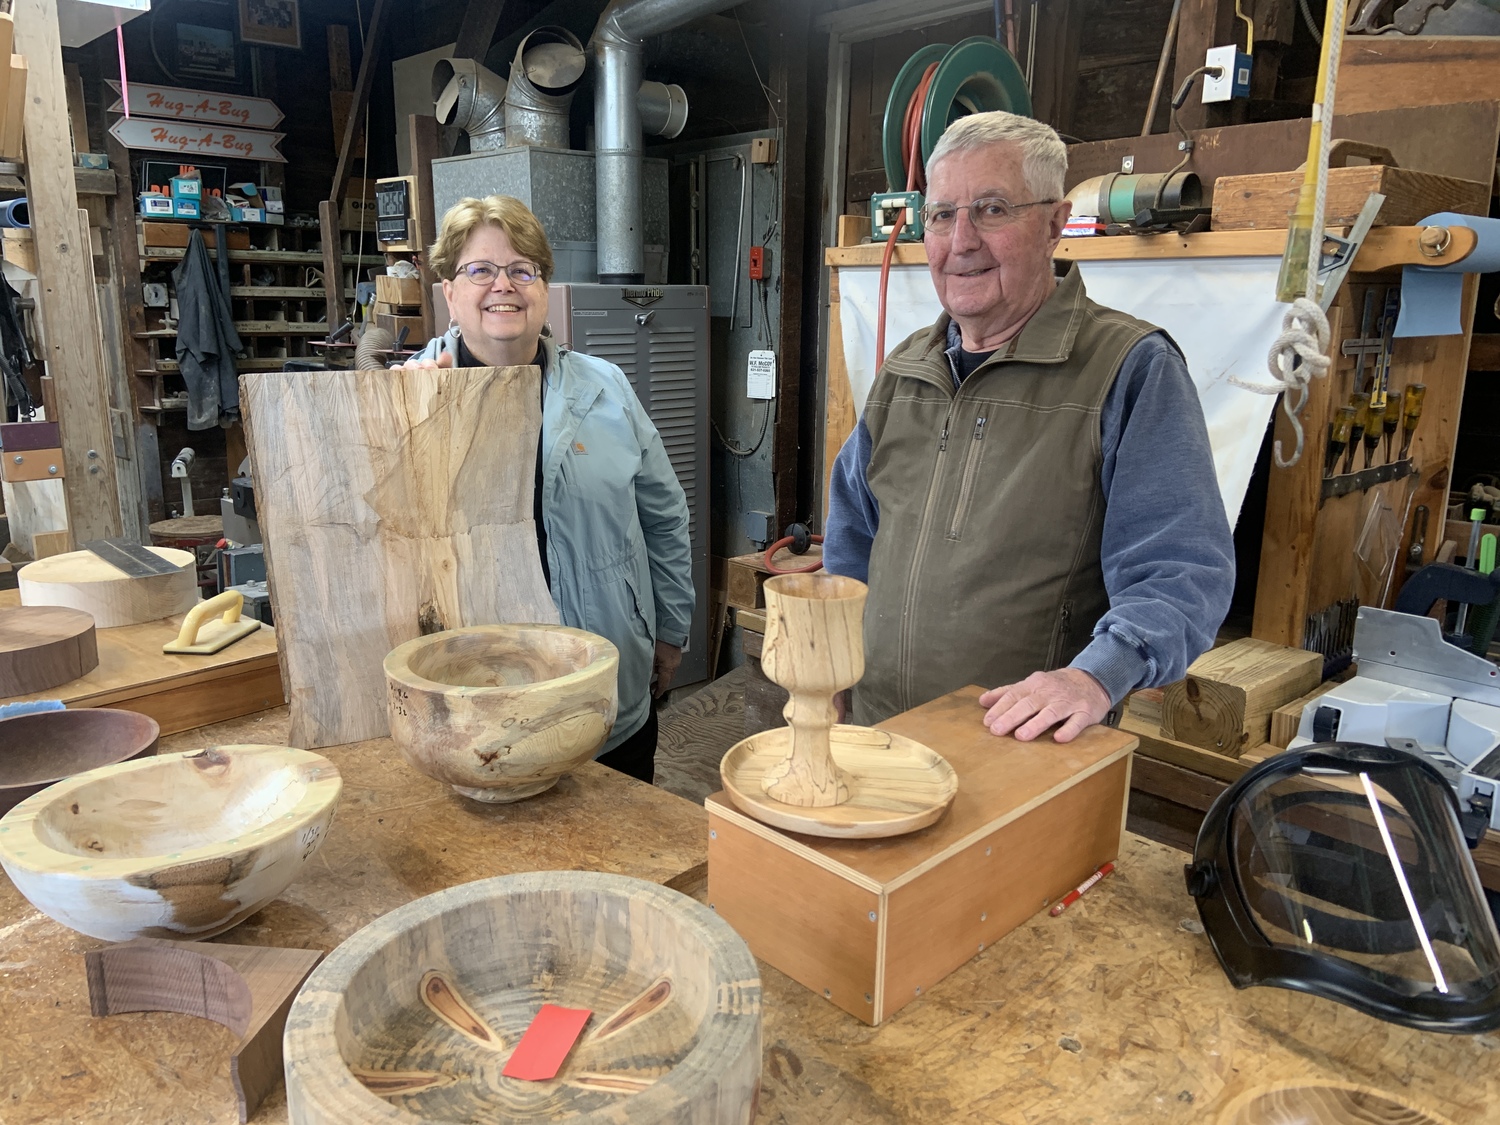 The Reverend Joanne Utley,  with a piece of unfinished beechwood, in John Halsey's Mecox wood shop. The Communion set he made for her sits in front of him. STEPHEN J. KOTZ